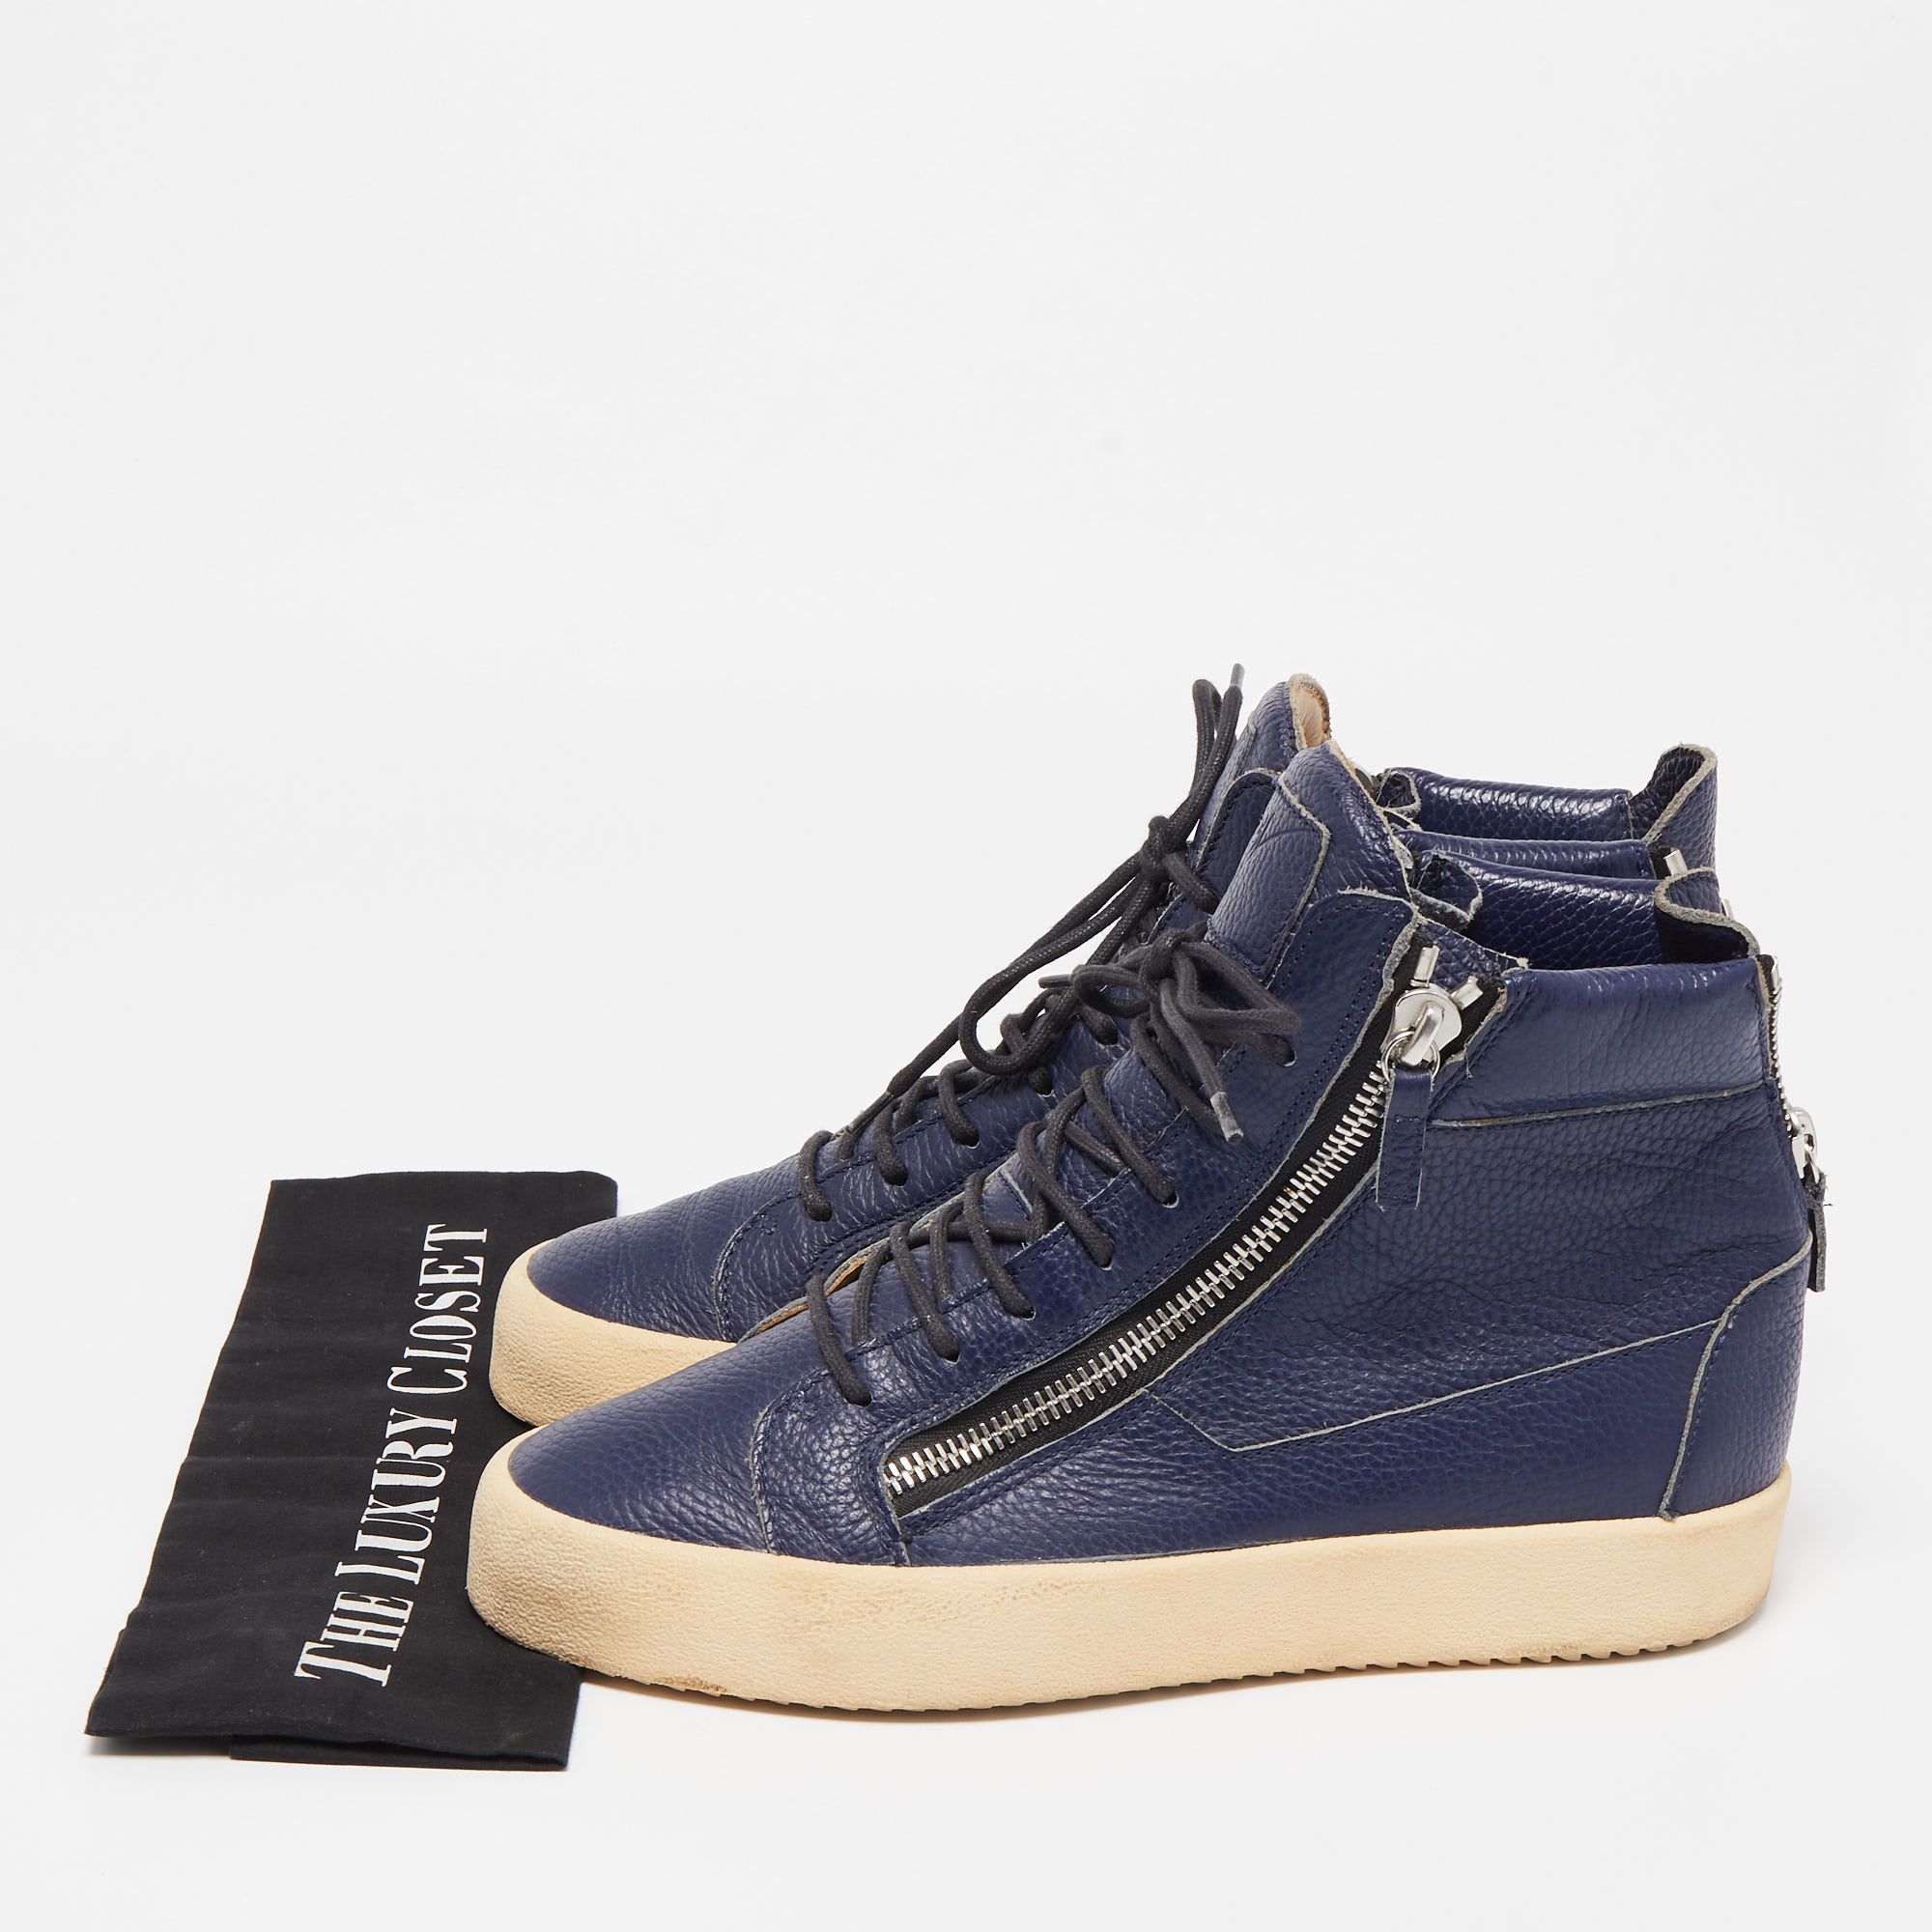 Giuseppe Zanotti Navy Blue Leather High Top Sneakers Size 43